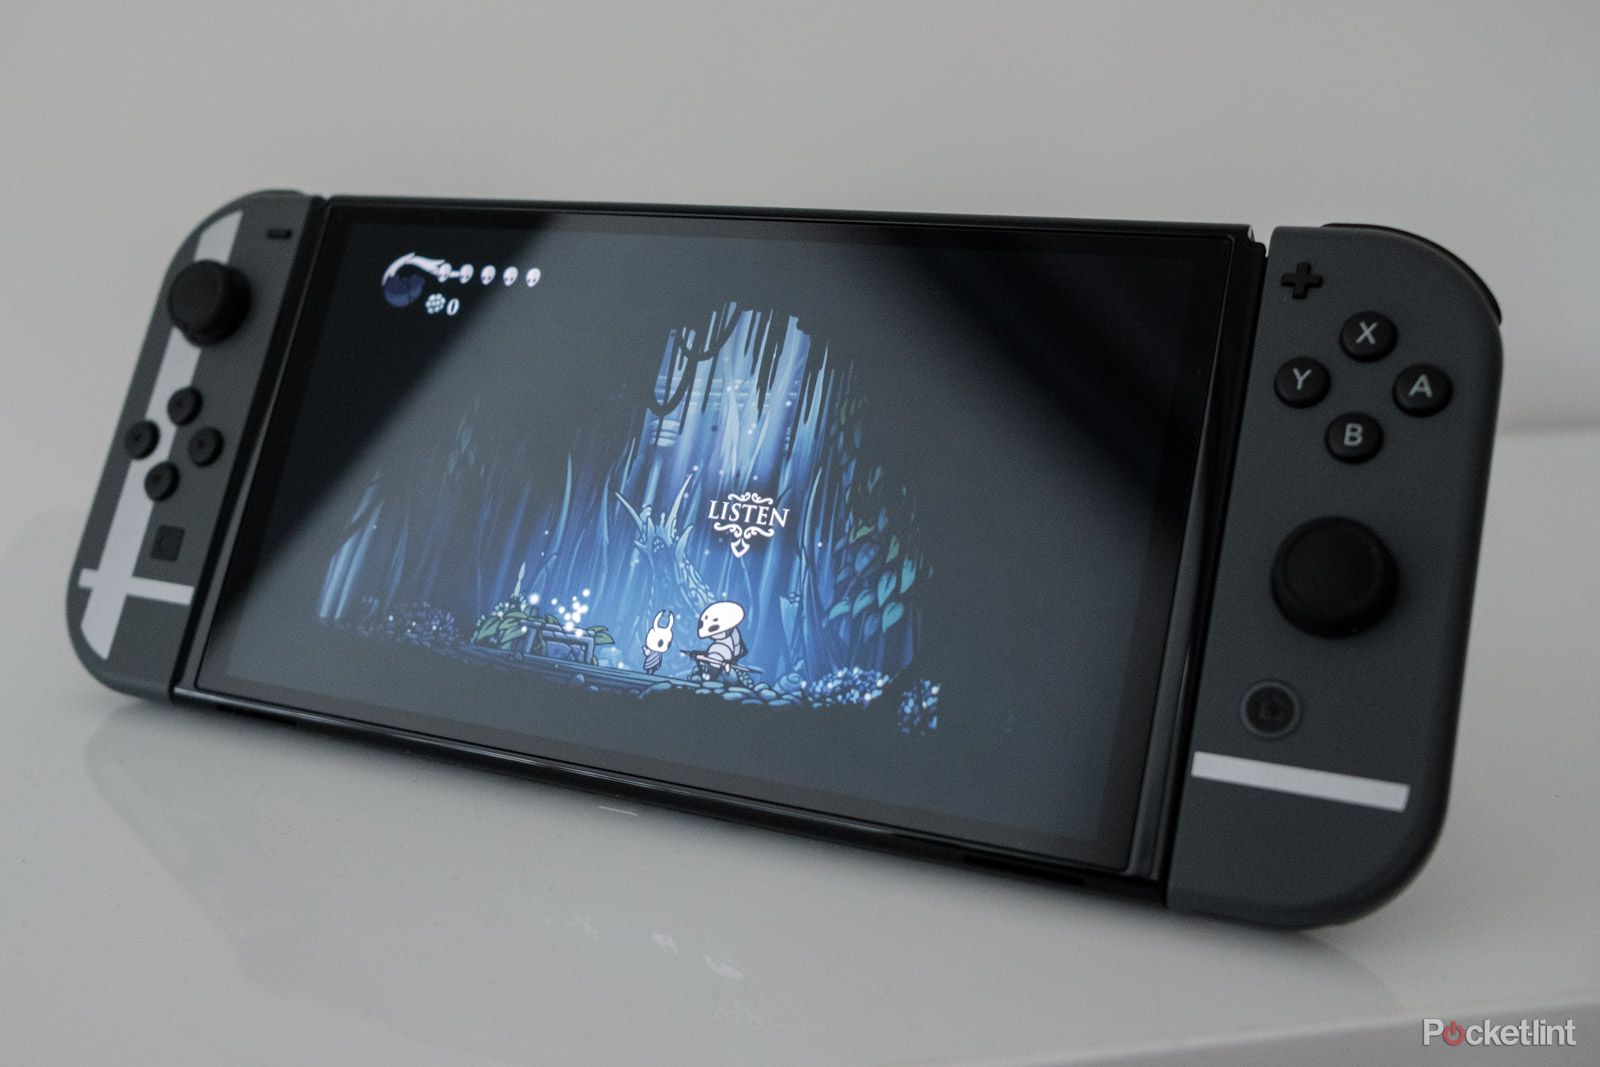 The Nintendo Switch offers two different display modes for players who prefer more naturalistic colors.